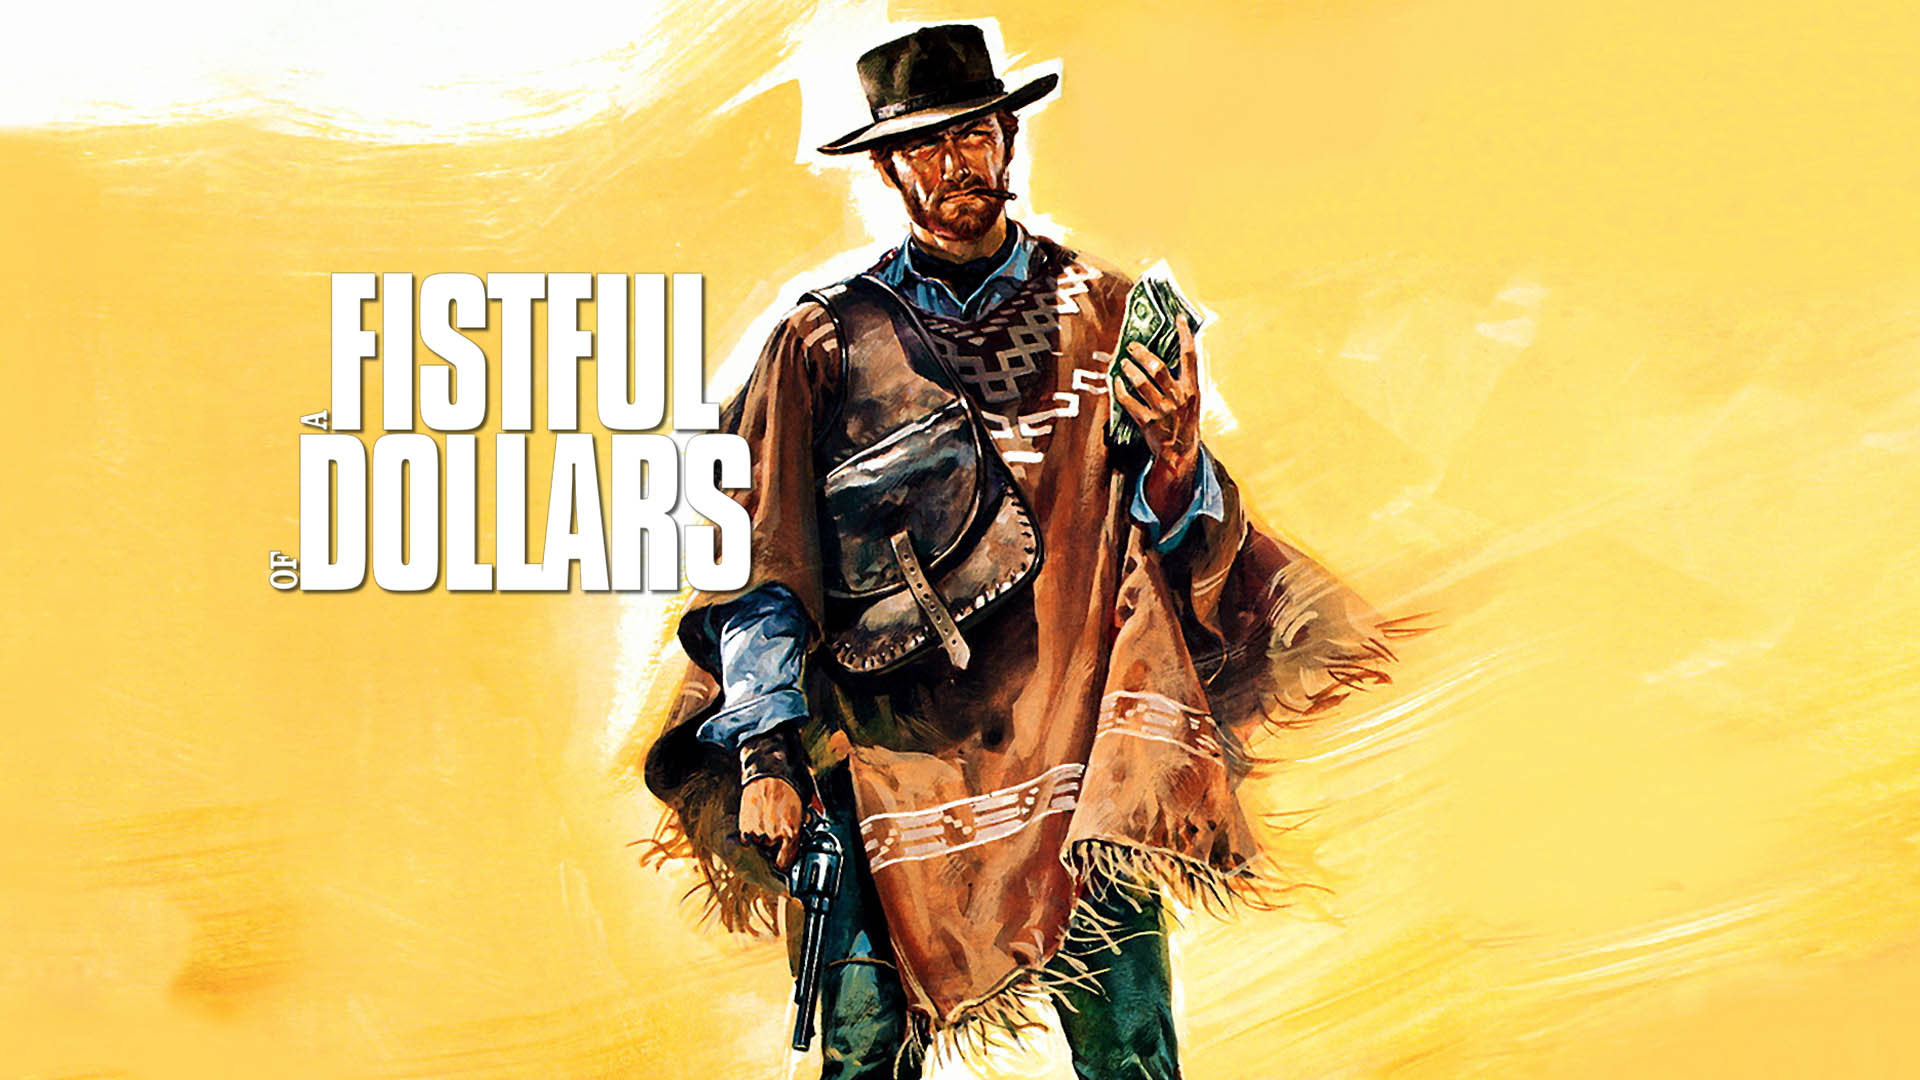 Watch A Fistful of Dollars Online | Stream Full Movies